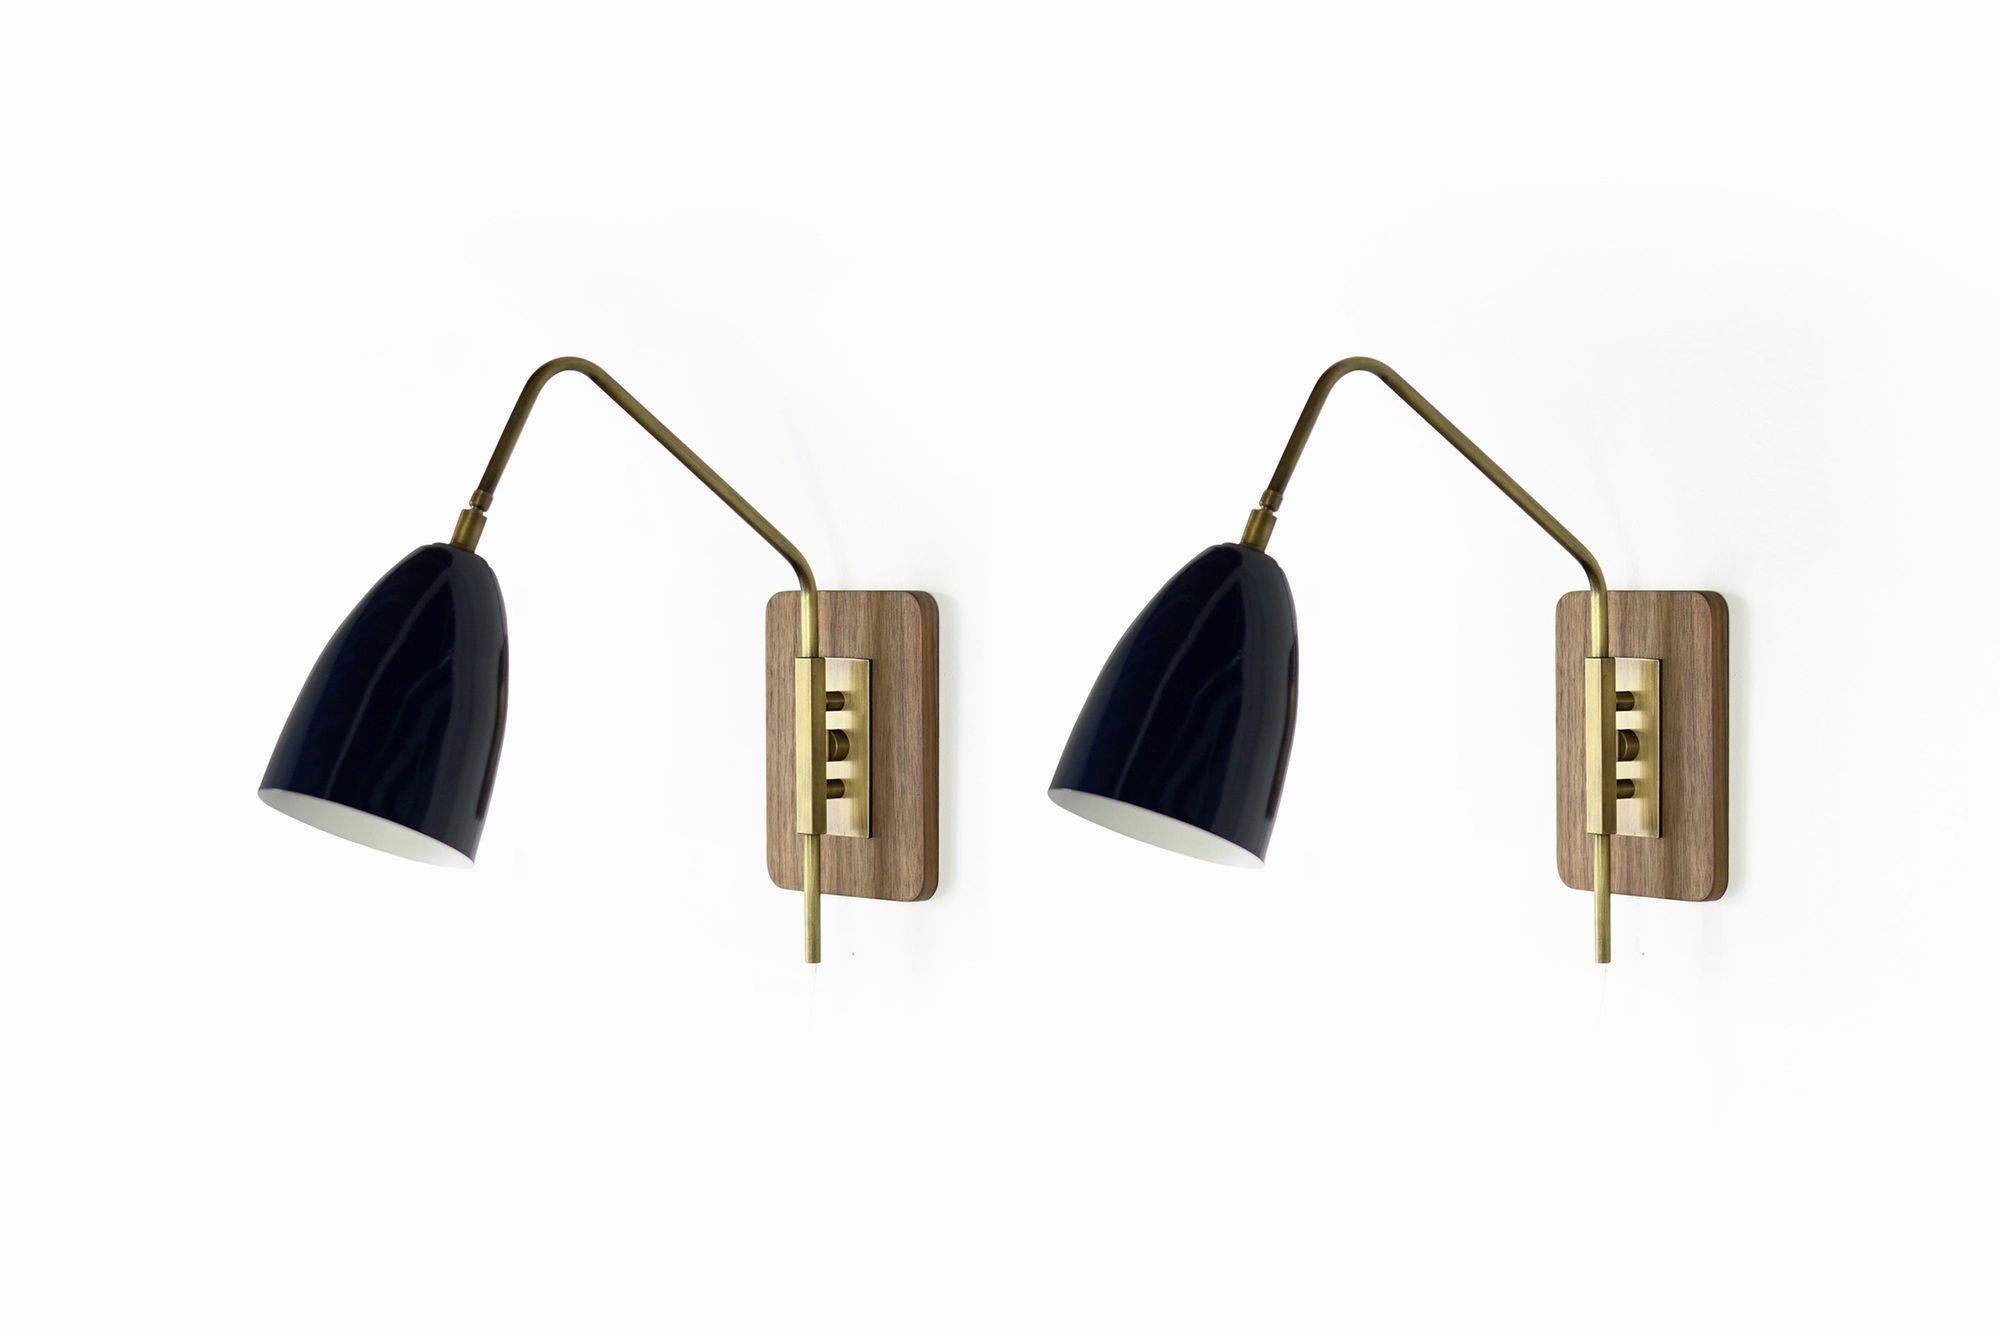 The Elska Wall Mount Reading Lamp is a stylish and functional fixture that draws inspiration from Scandinavian, Danish, and Italian Mid-Century Modernism. Its walnut backplate and architectural brass fittings create a visually stunning design